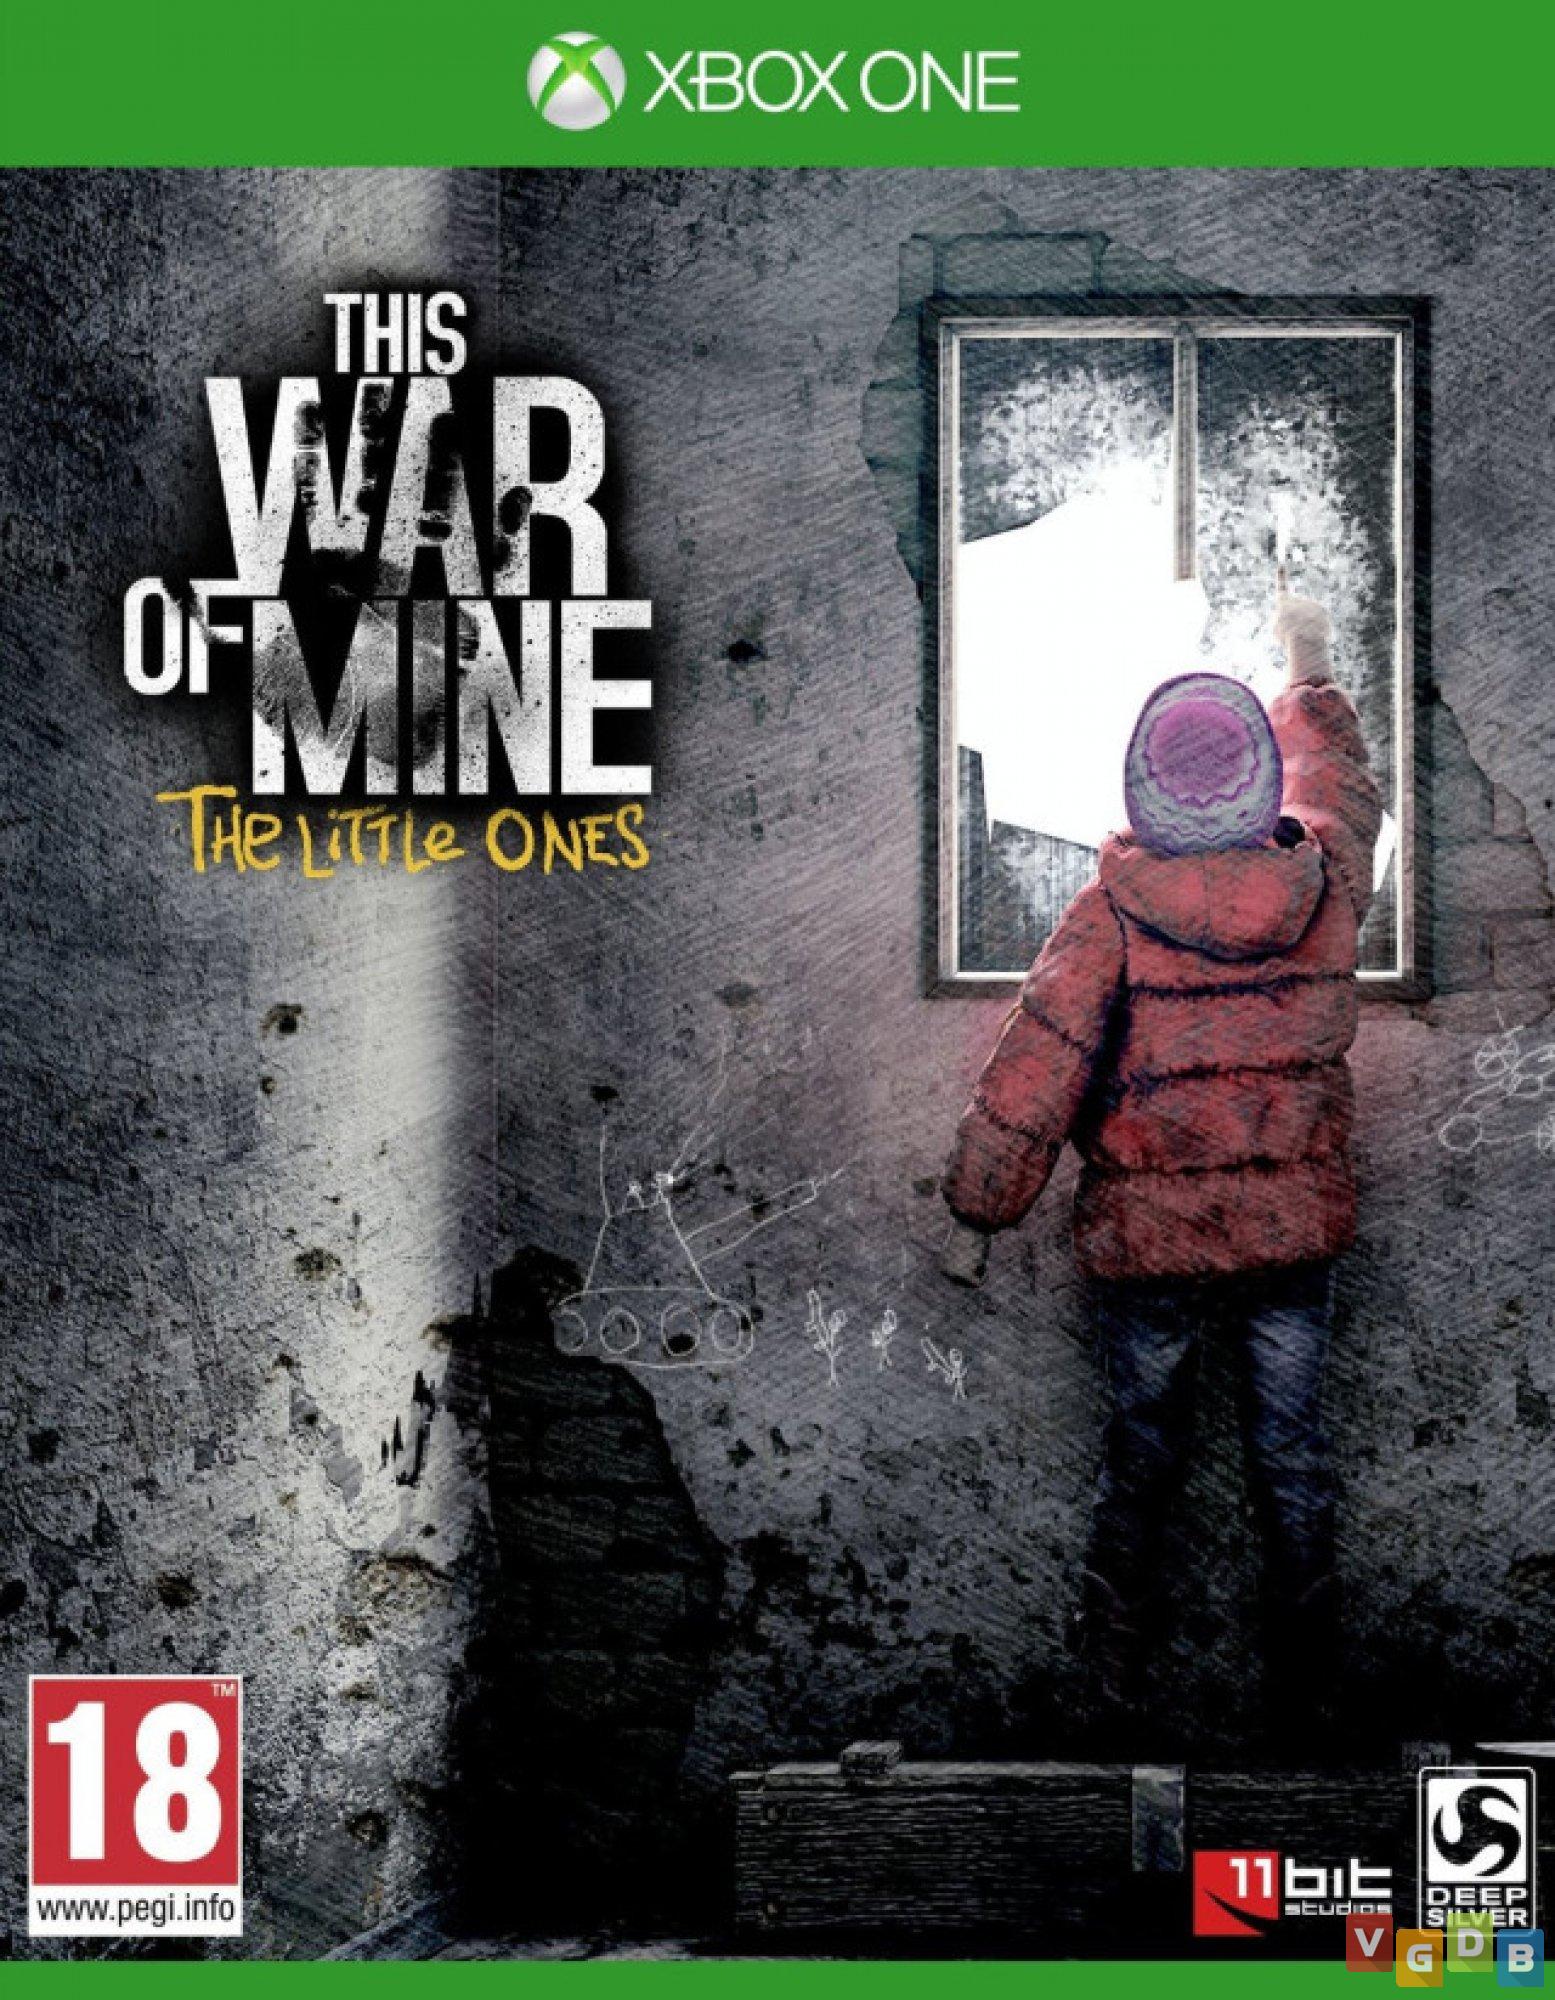 this war of mine the little ones download free